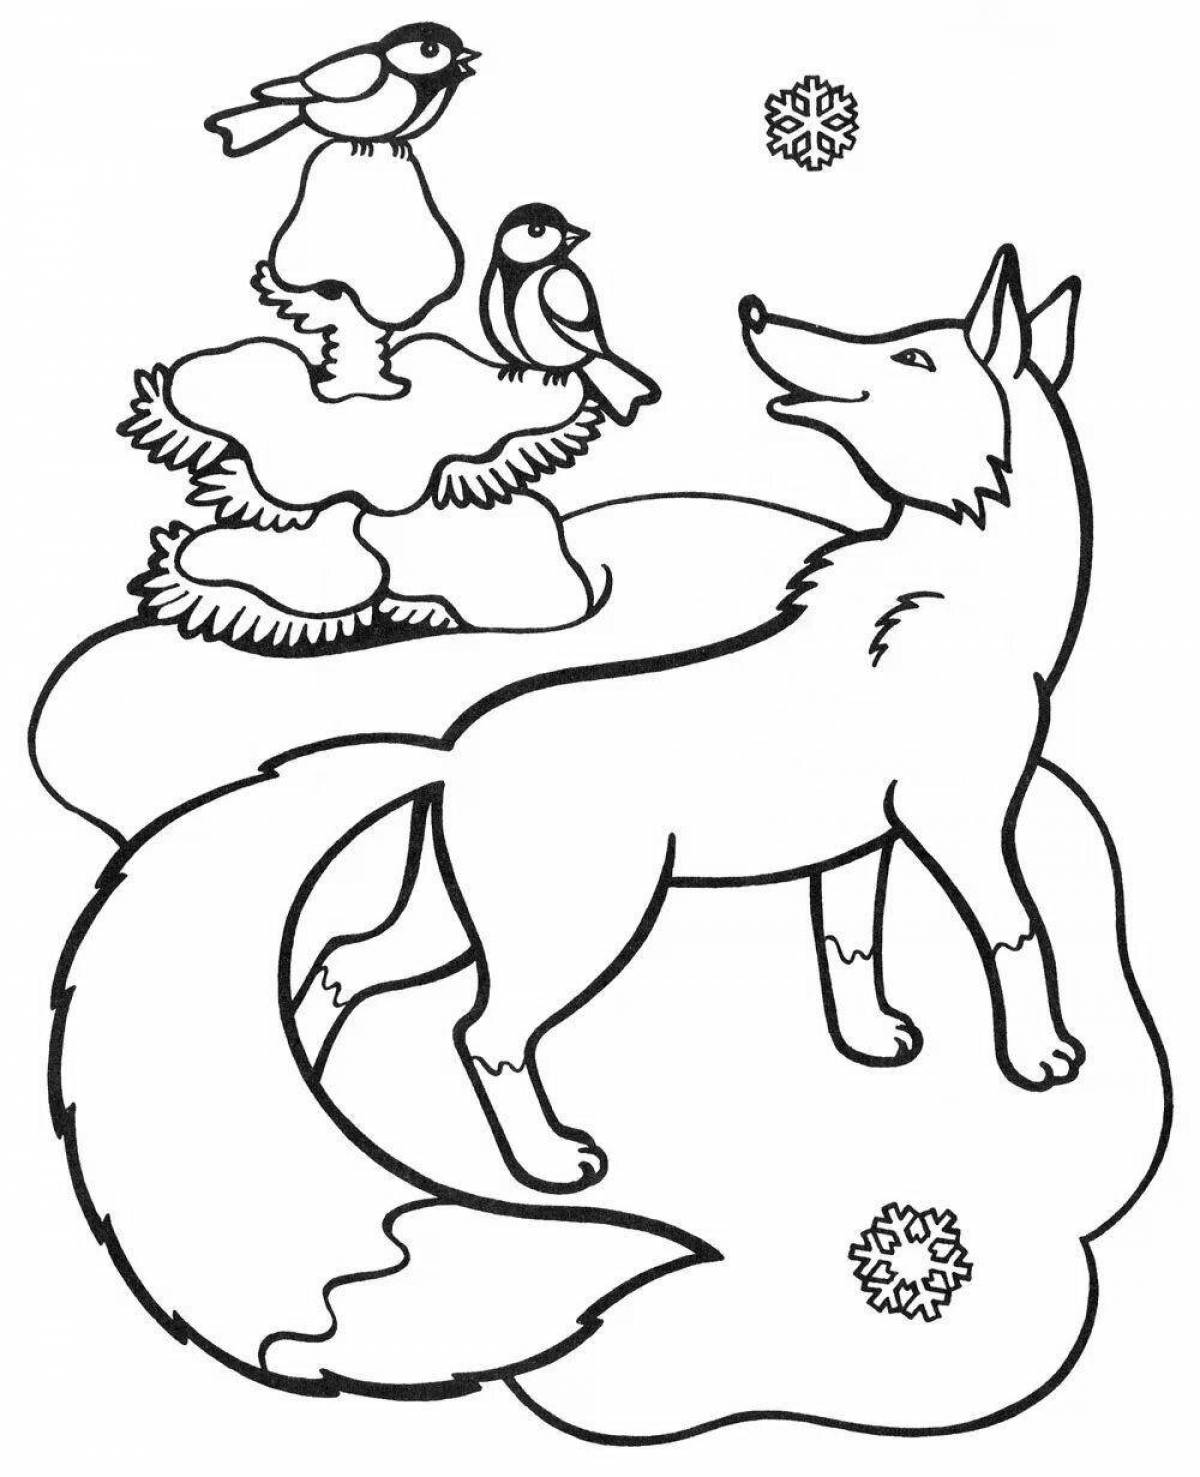 Funny animal coloring pages in winter